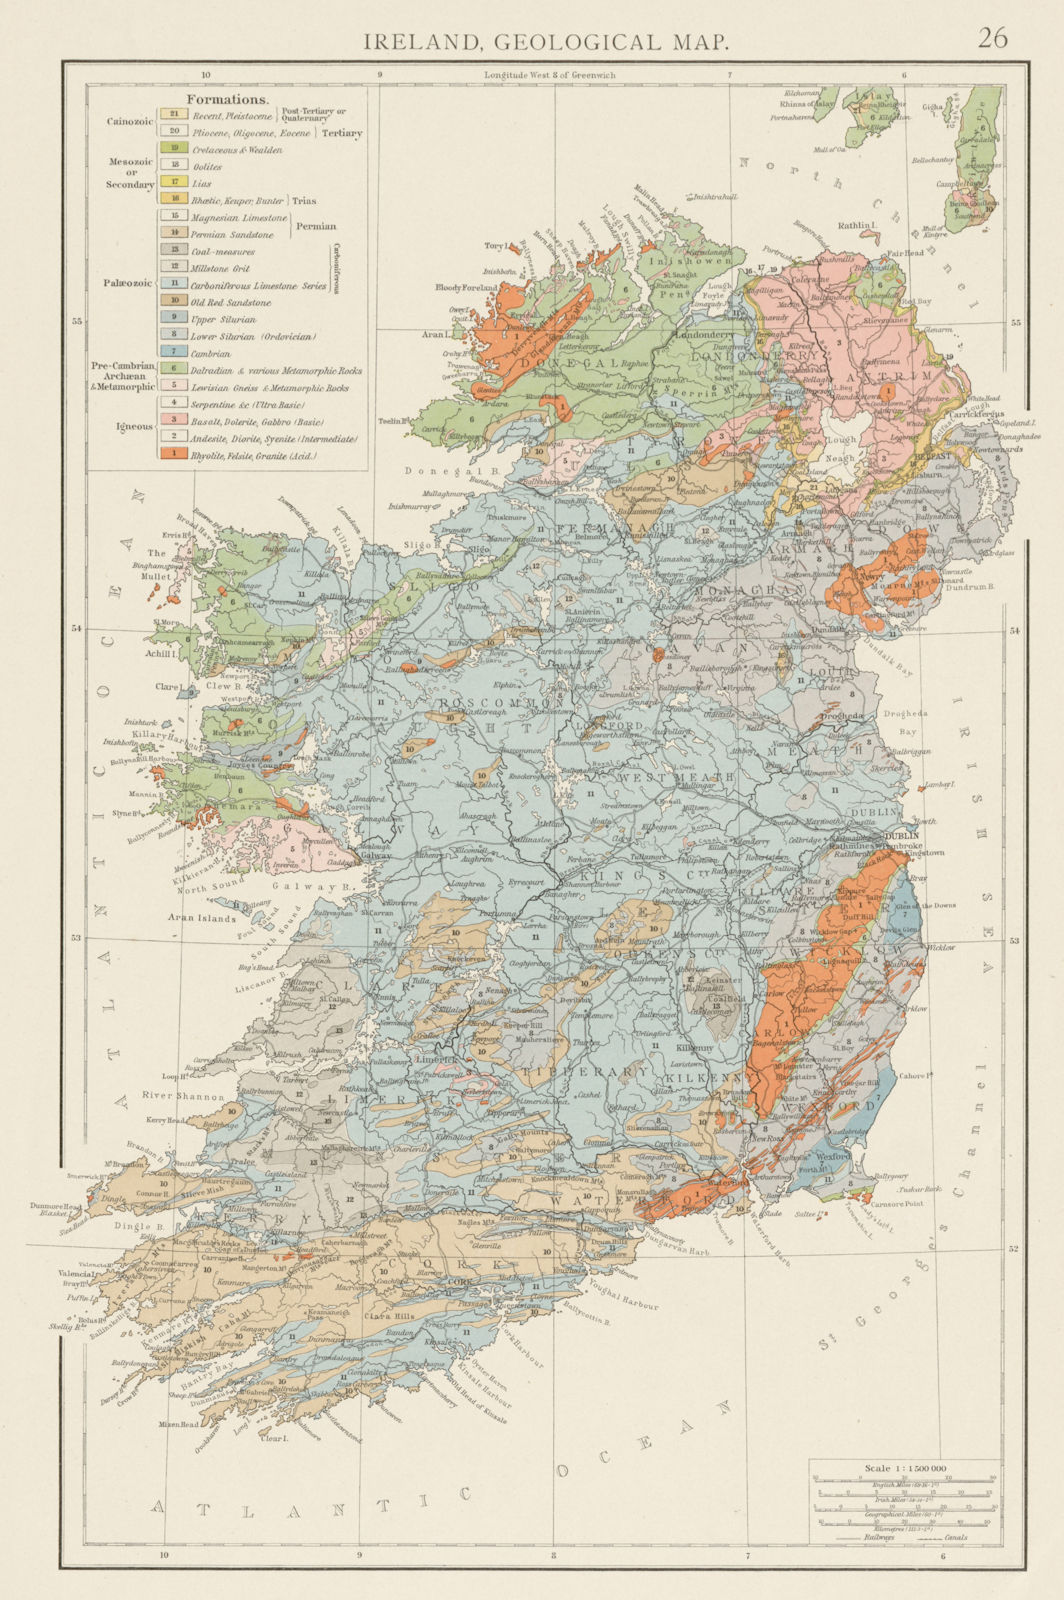 Associate Product Ireland, Geological map. THE TIMES 1900 old antique vintage plan chart